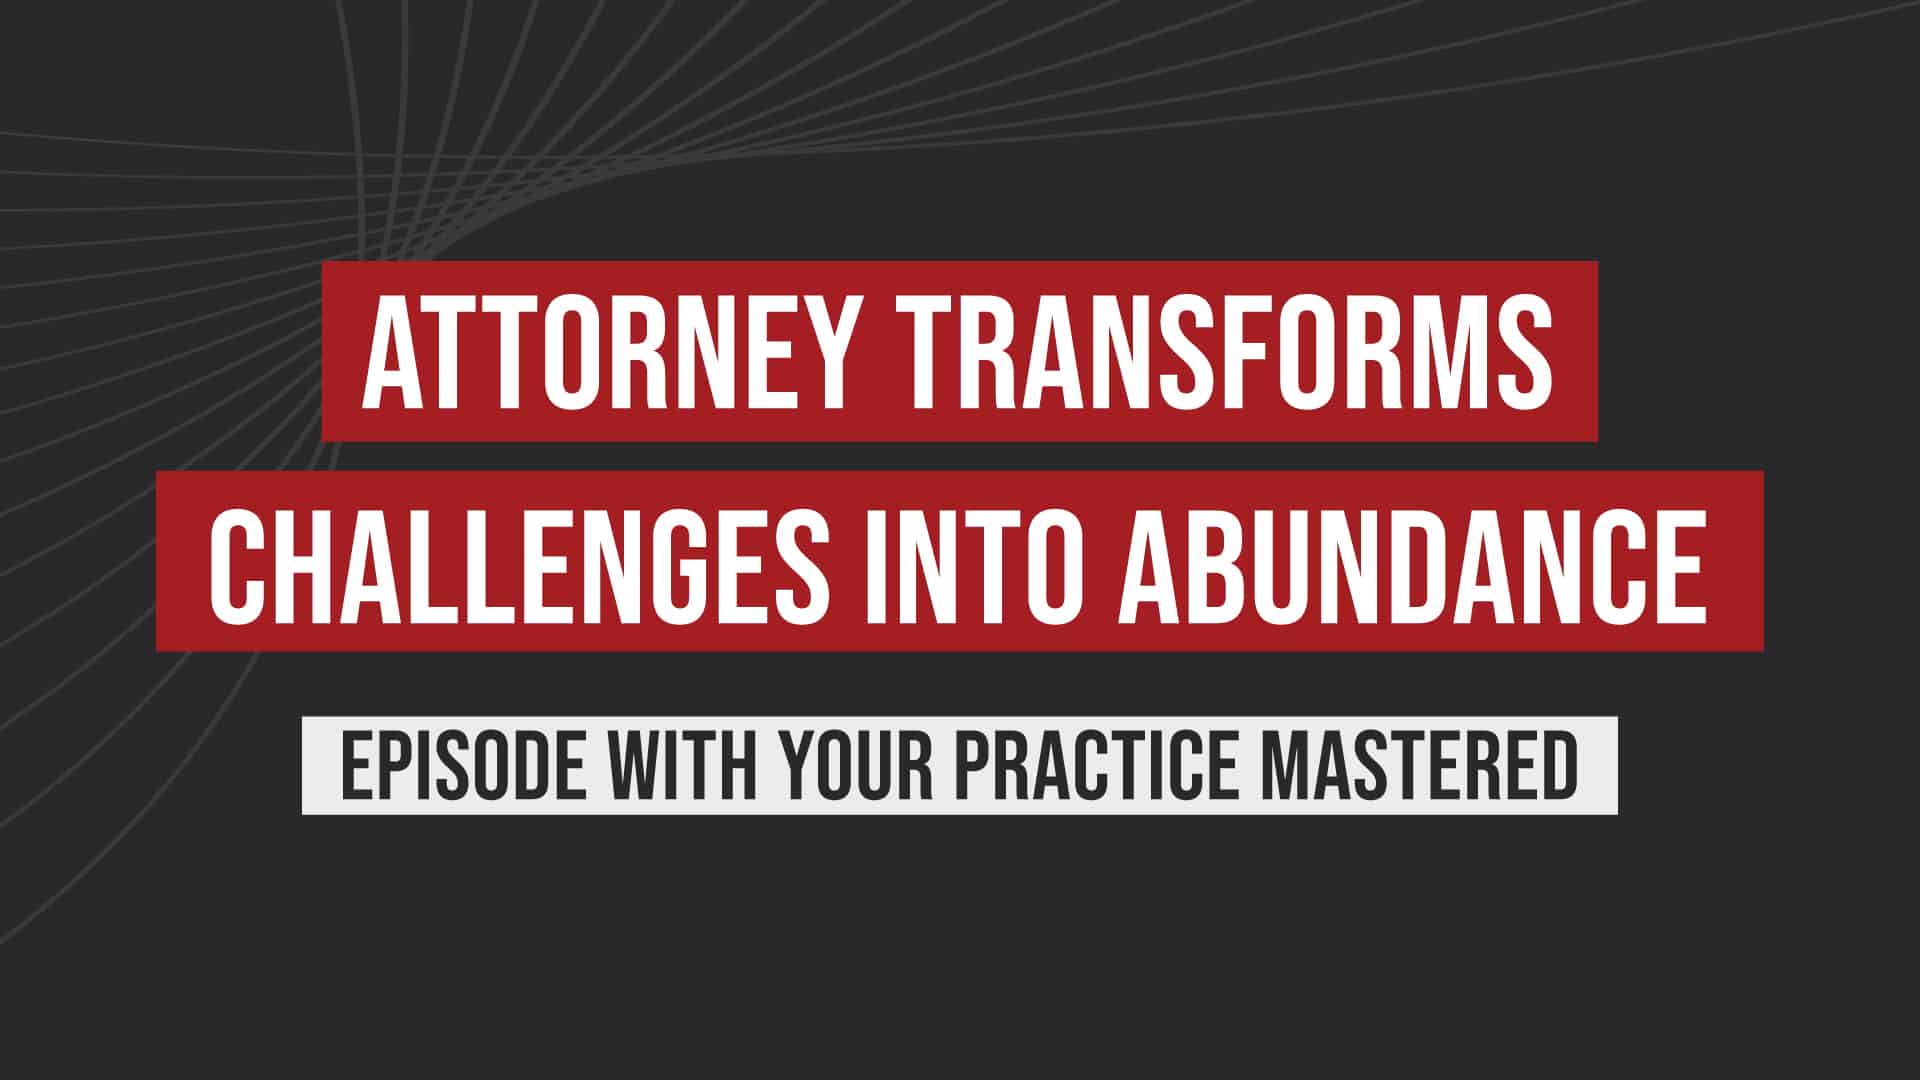 Infographic titled "Attorney Transforms Challenges into Abundance", episode with Your Practice Mastered